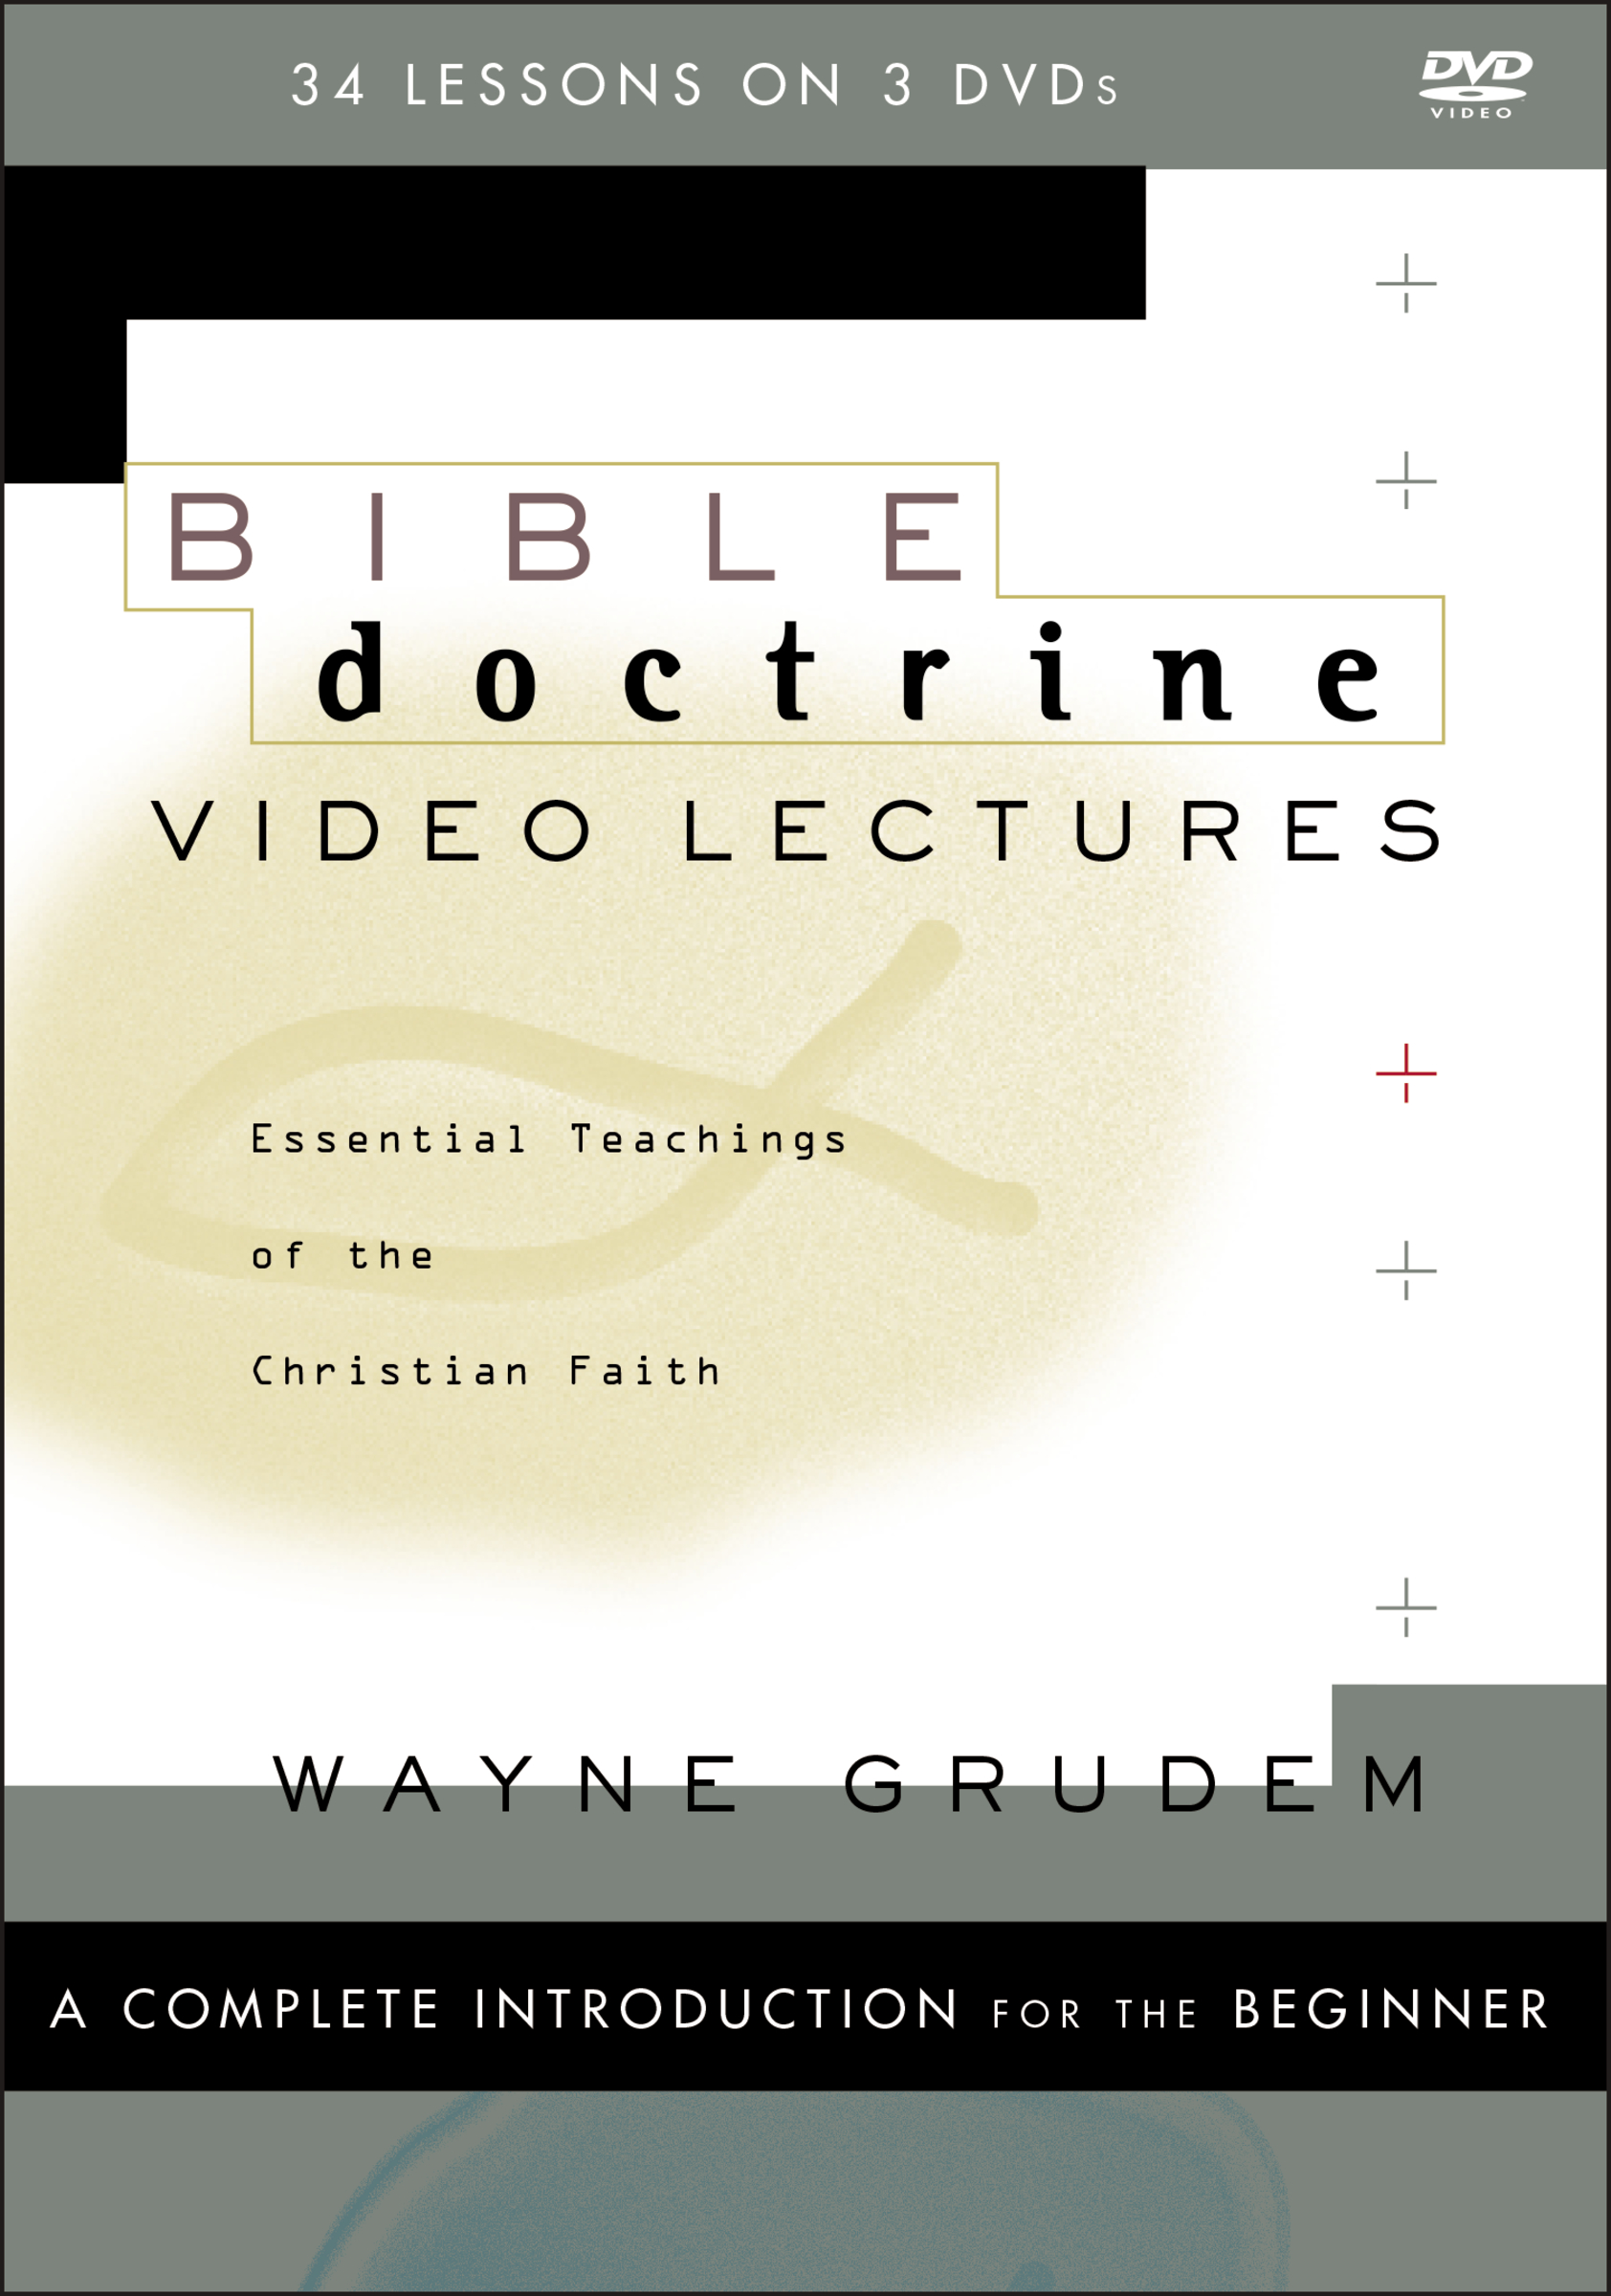 Bible Doctrine Video Lectures